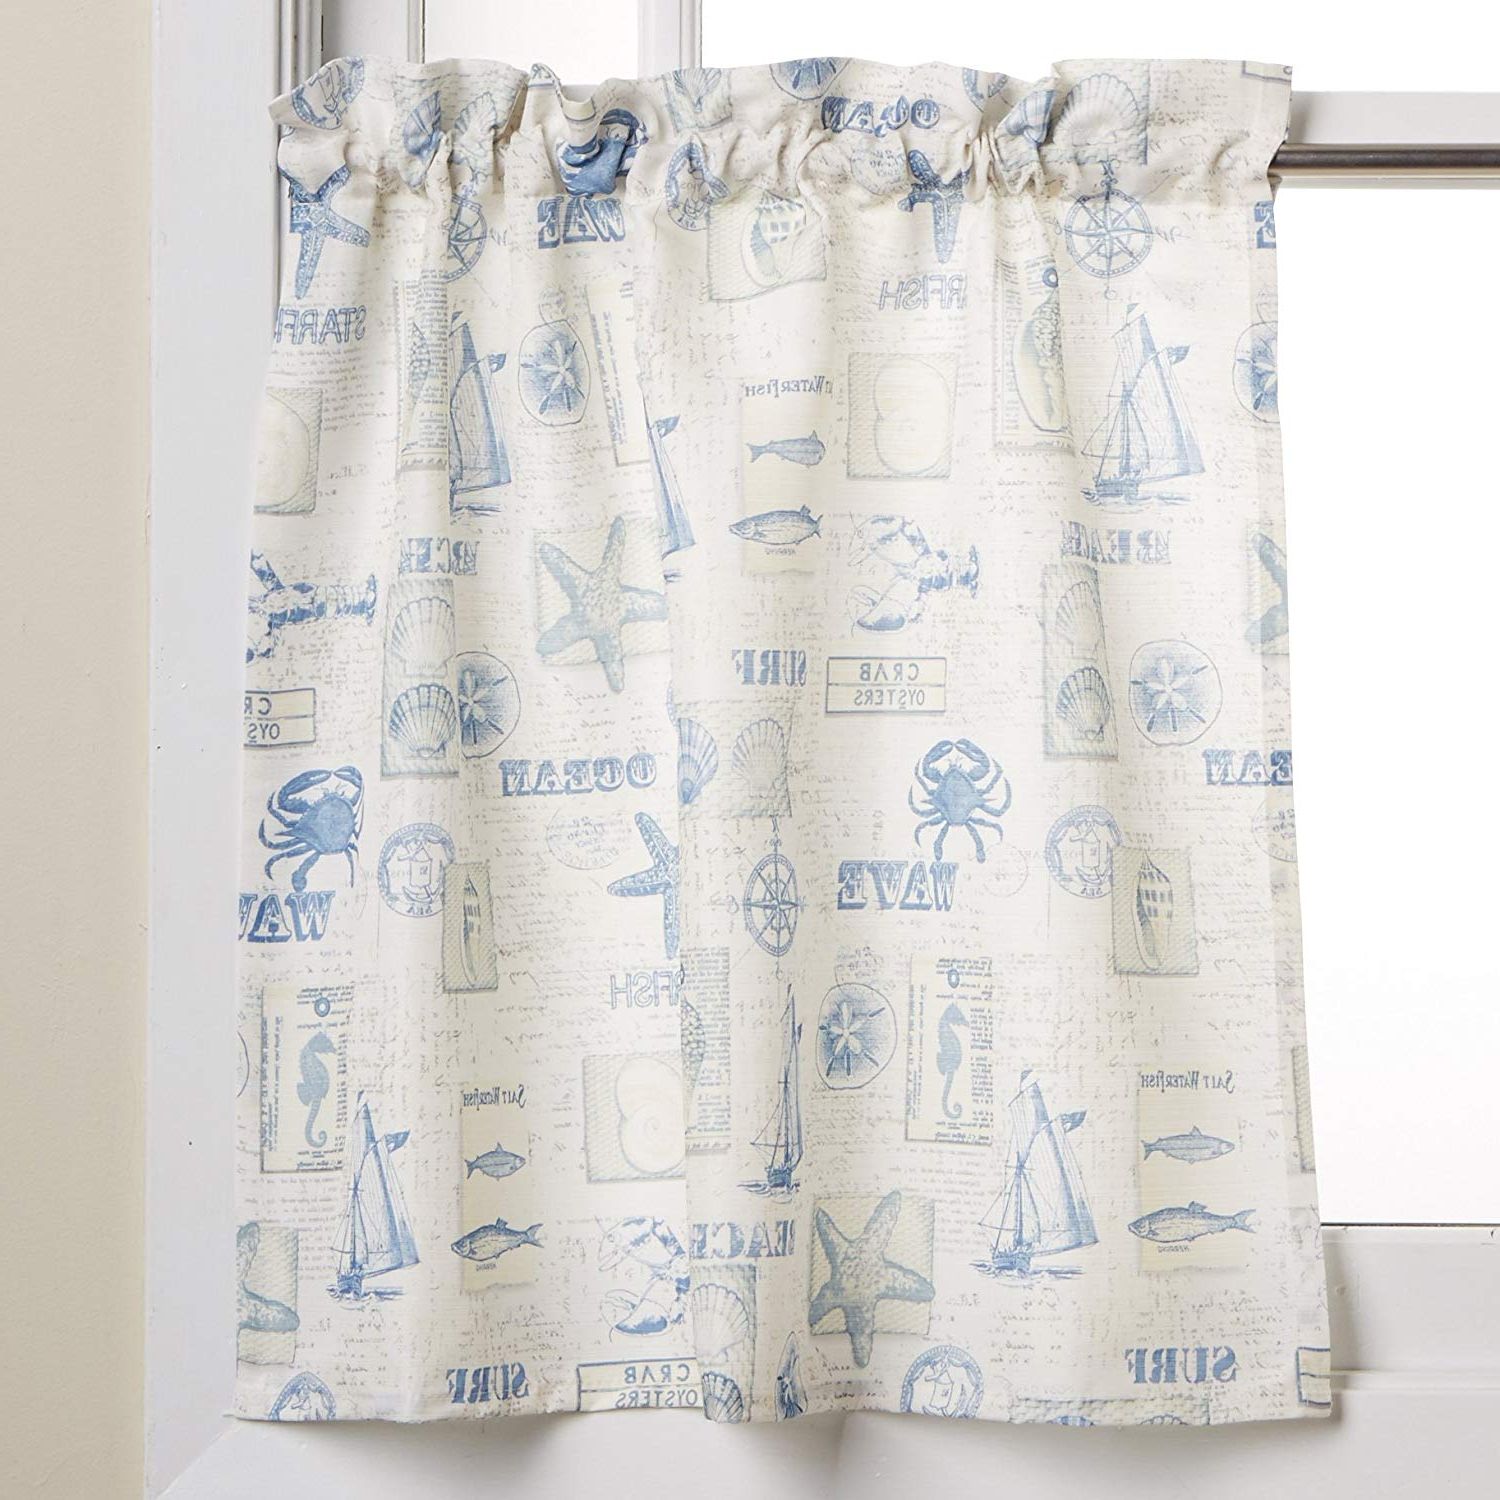 Most Recent Tranquility Curtain Tier Pairs With Regard To Lorraine Home Fashionsthe Sea Tier Pair, 60 X 24 Inch (View 17 of 20)